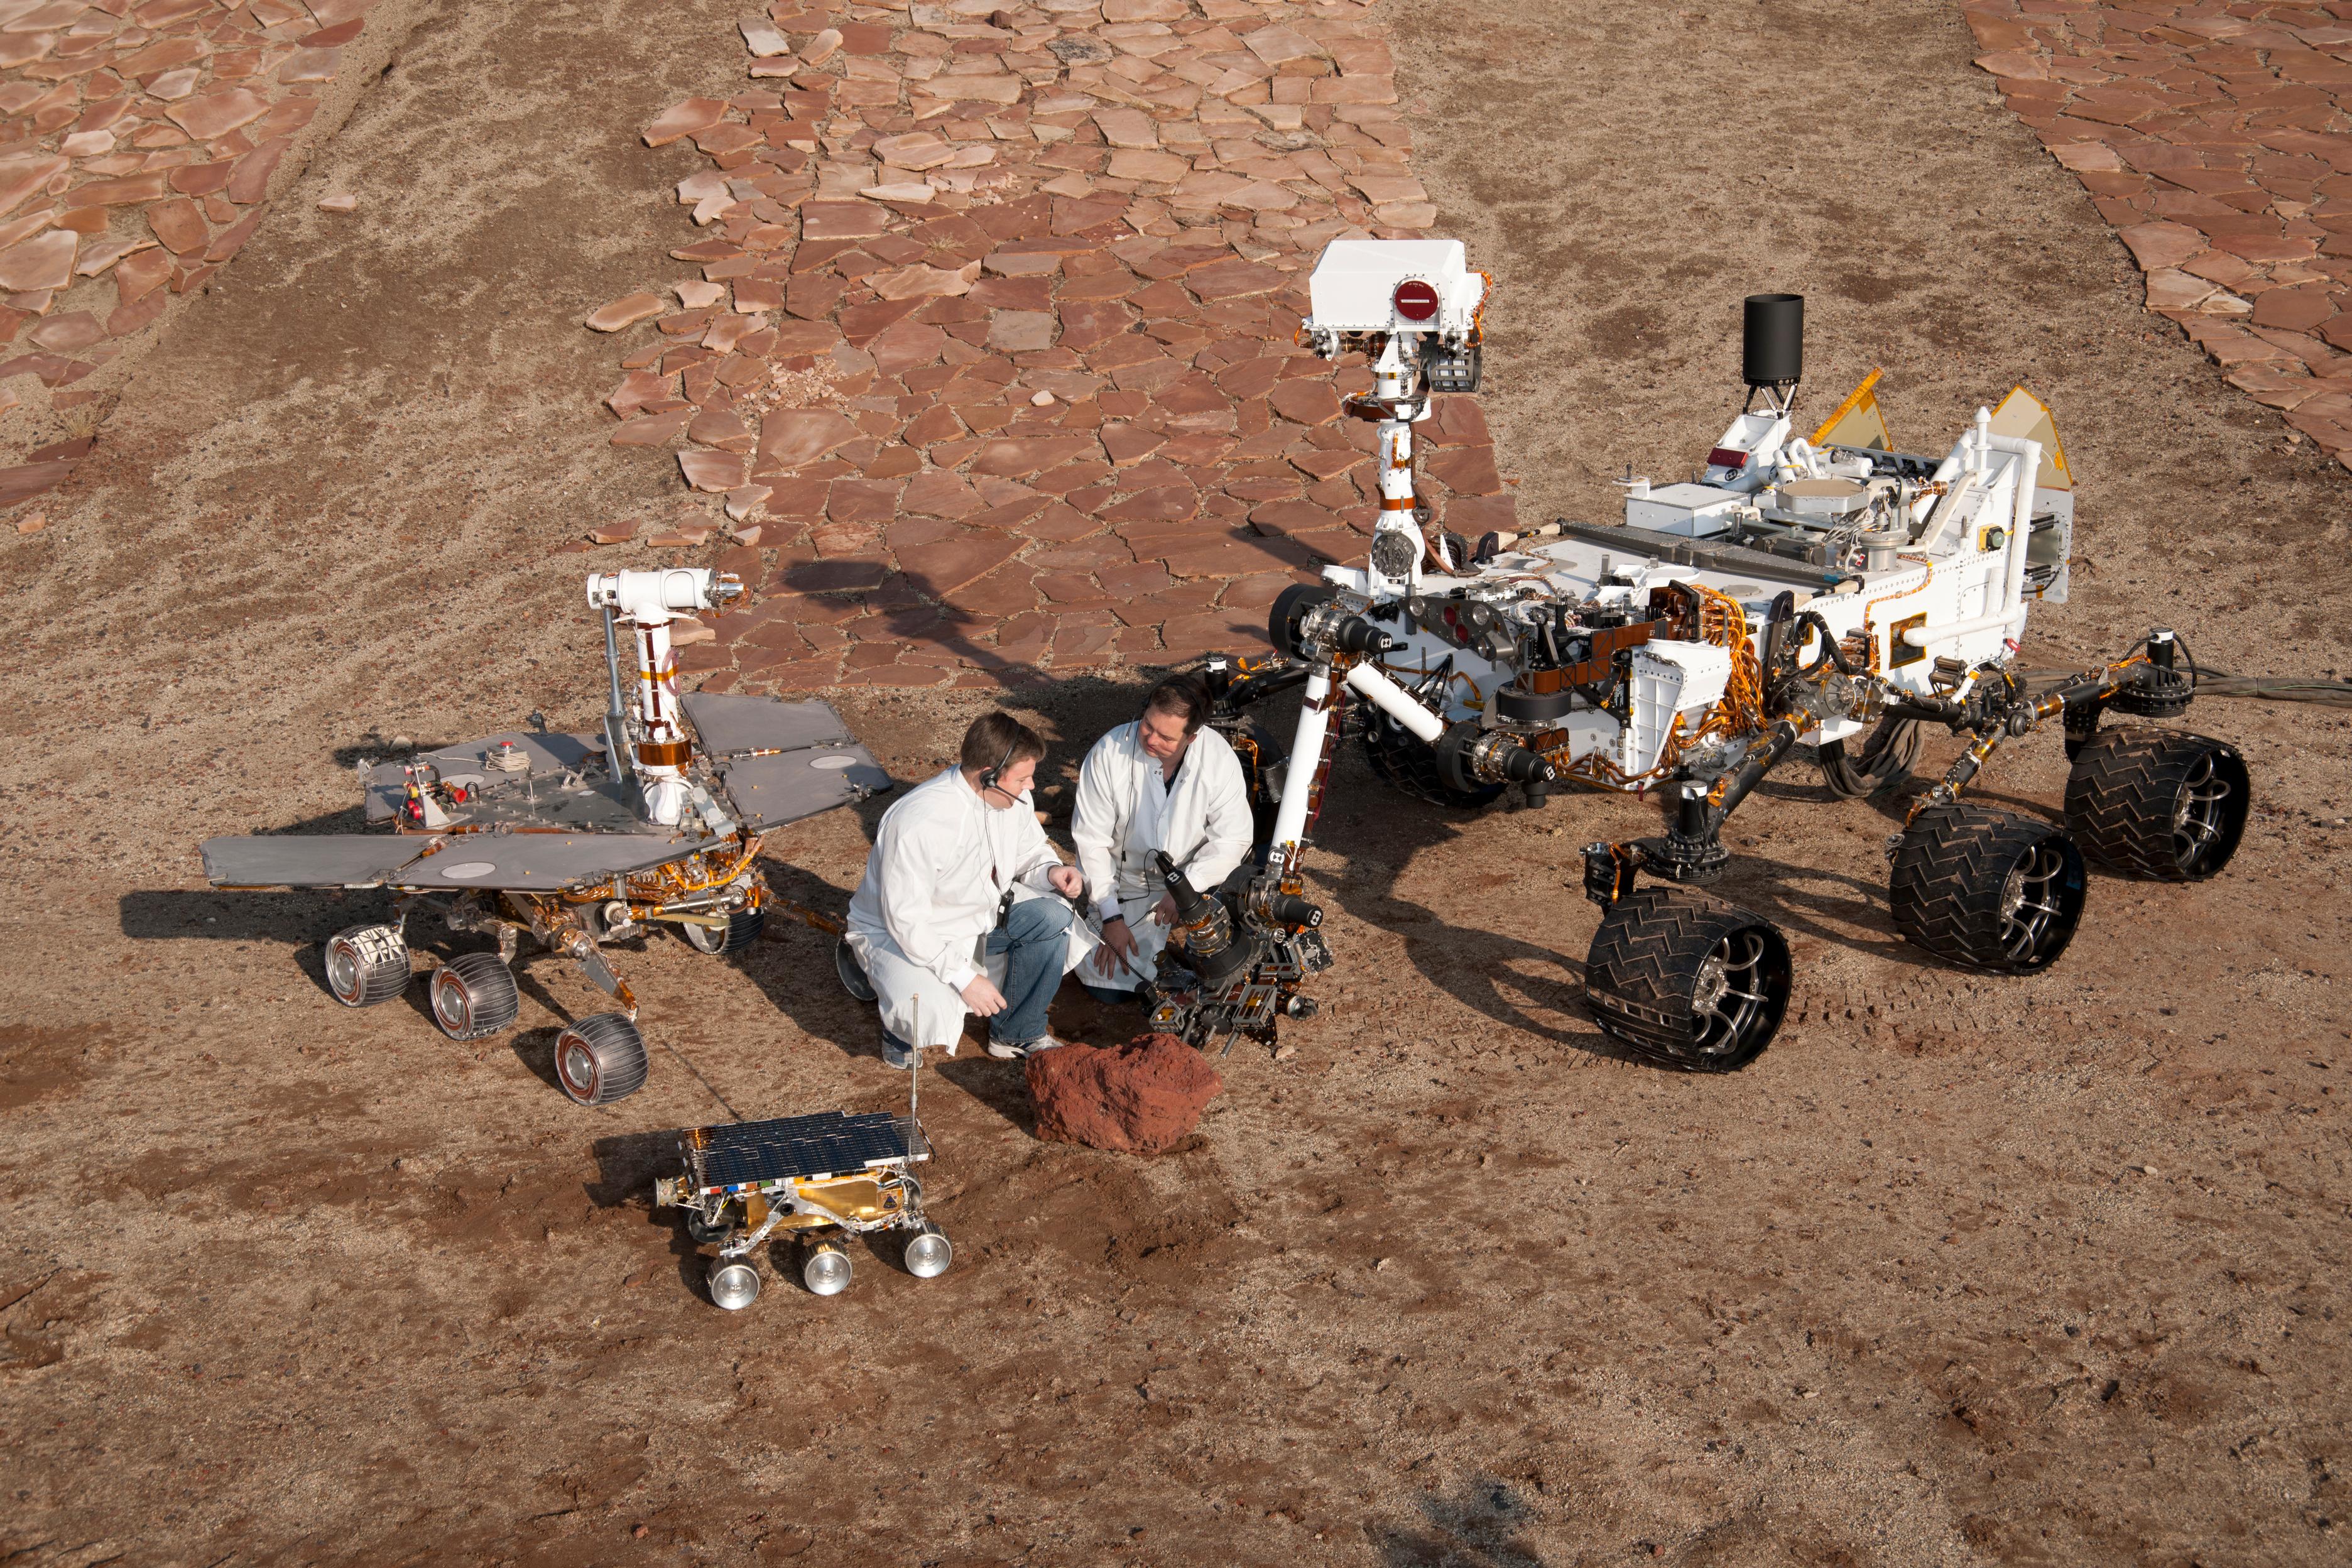 Two spacecraft engineers join a grouping of vehicles providing a comparison of three generations of Mars rovers developed at NASA's Jet Propulsion Laboratory, Pasadena, Calif. The setting is JPL's Mars Yard testing area.